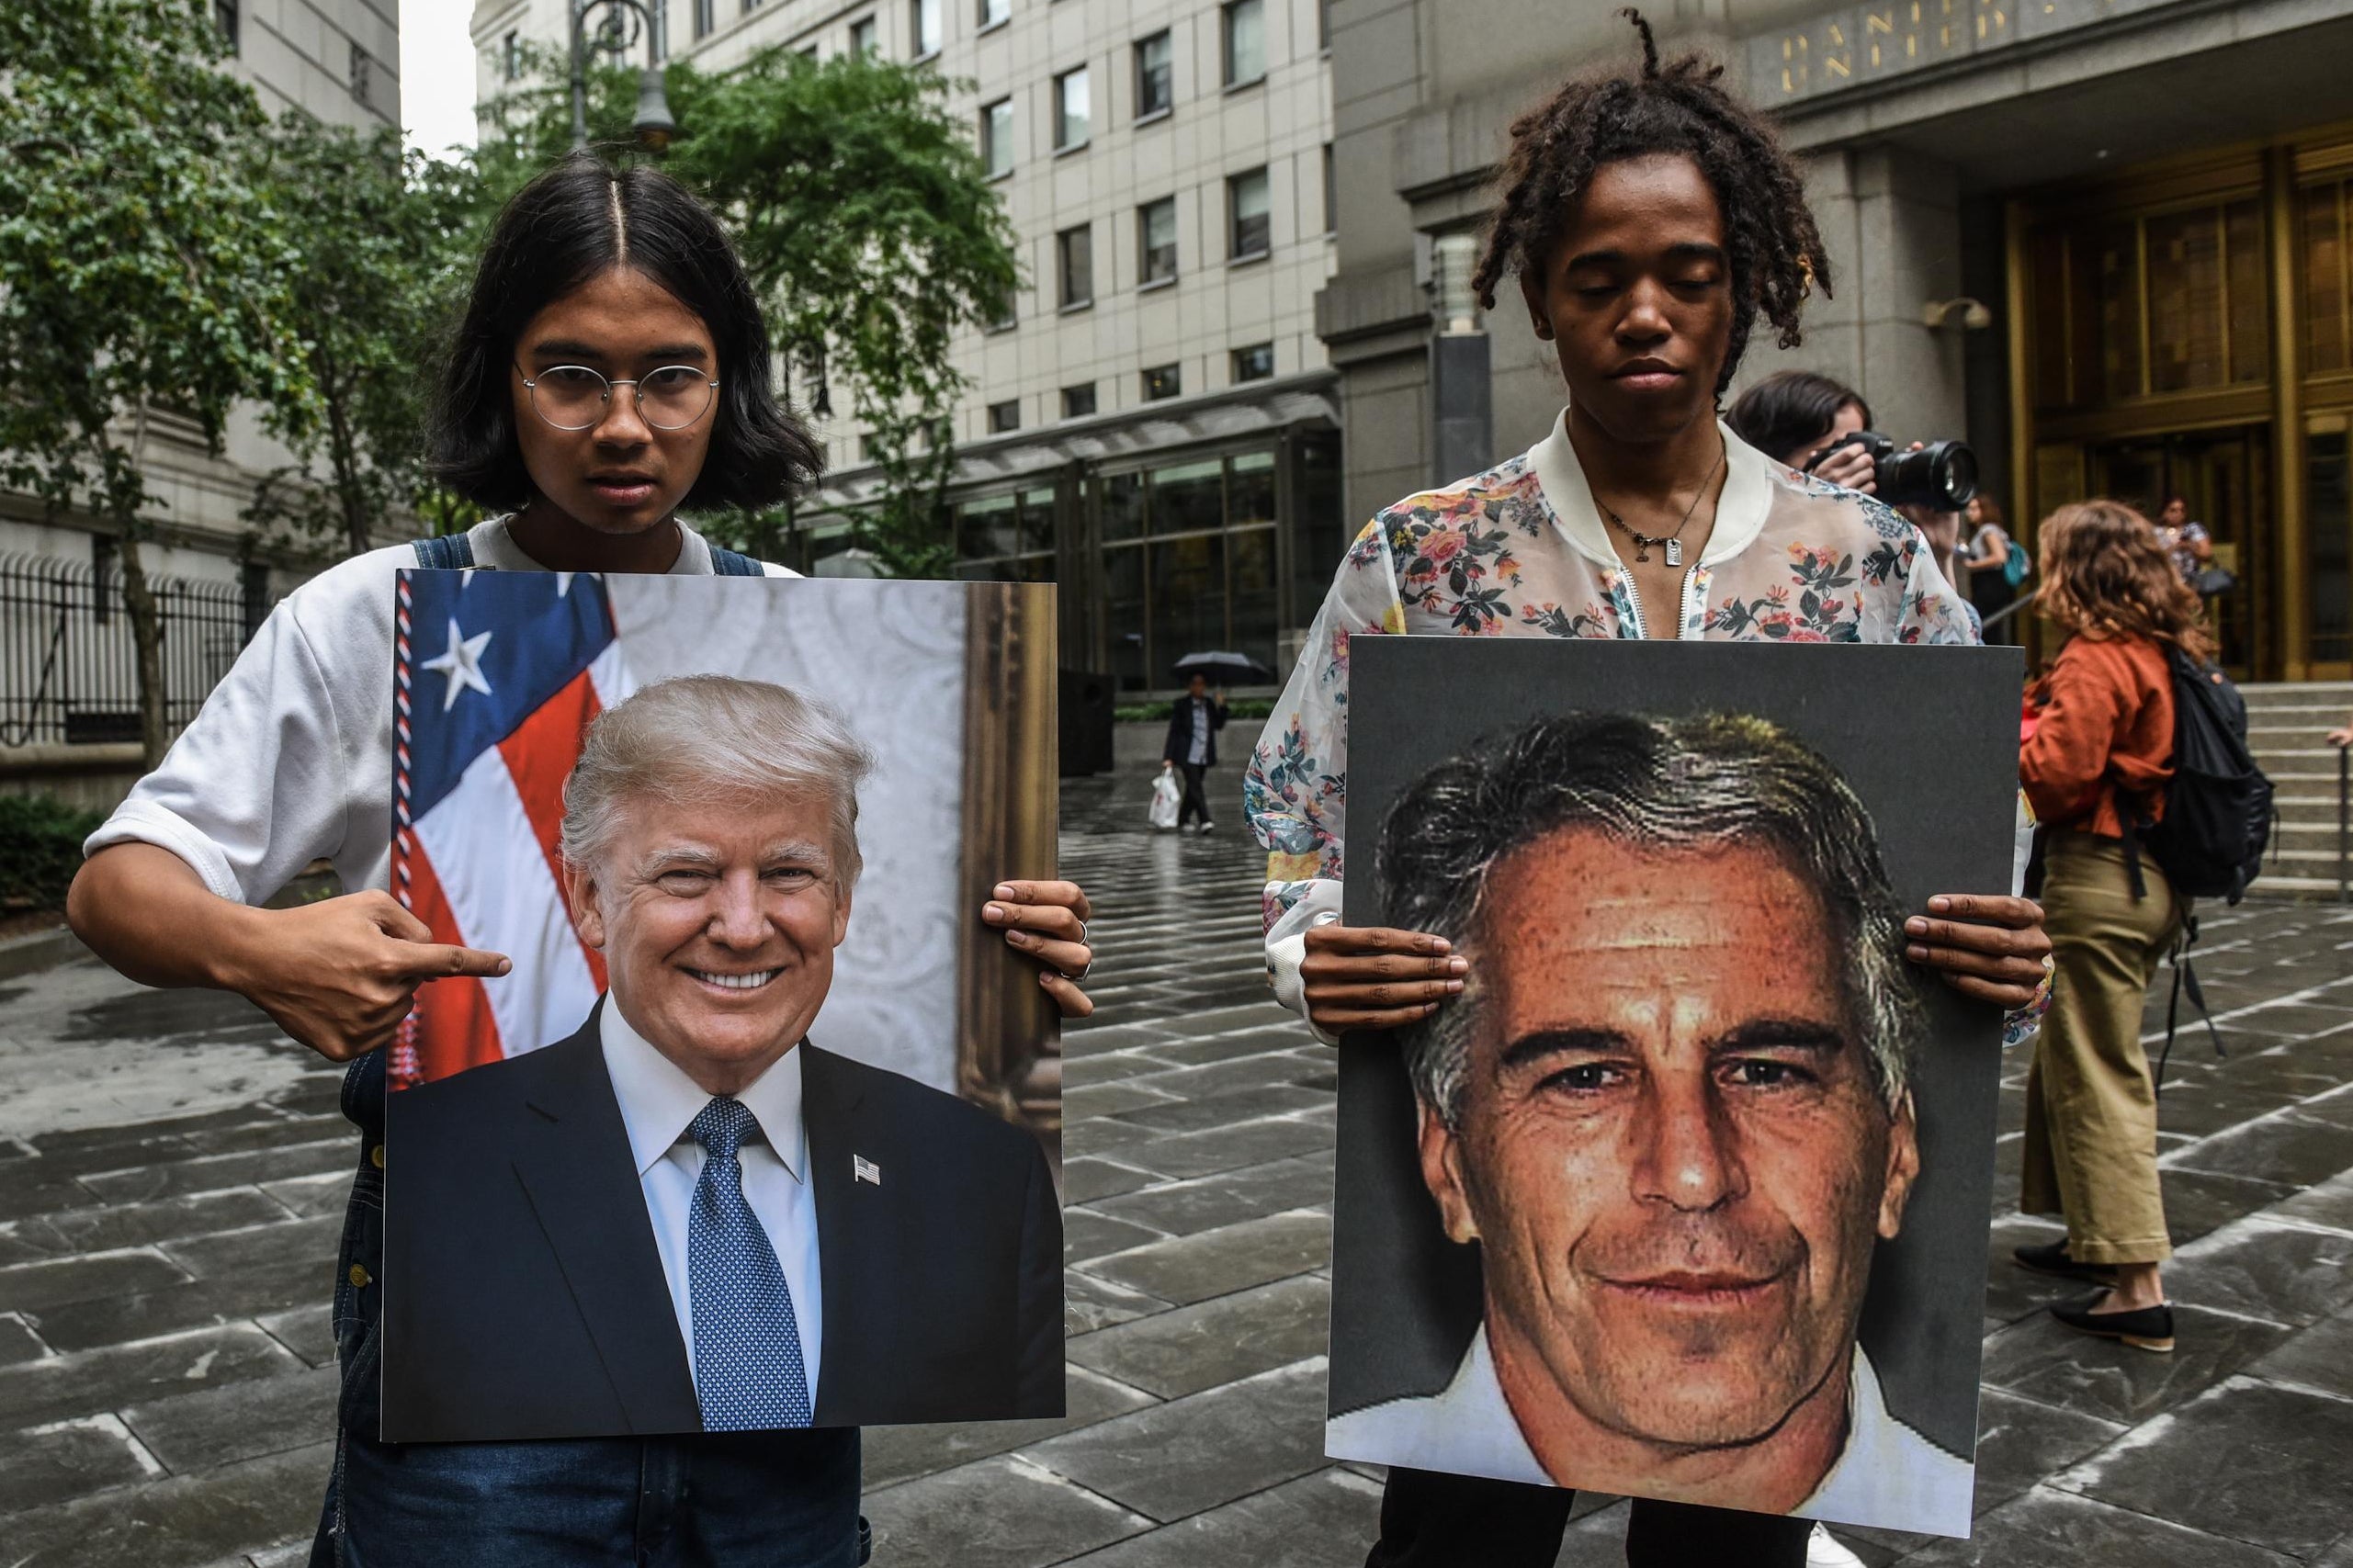 Protesters hold up photos of Donald Trump and Jeffrey Epstein.